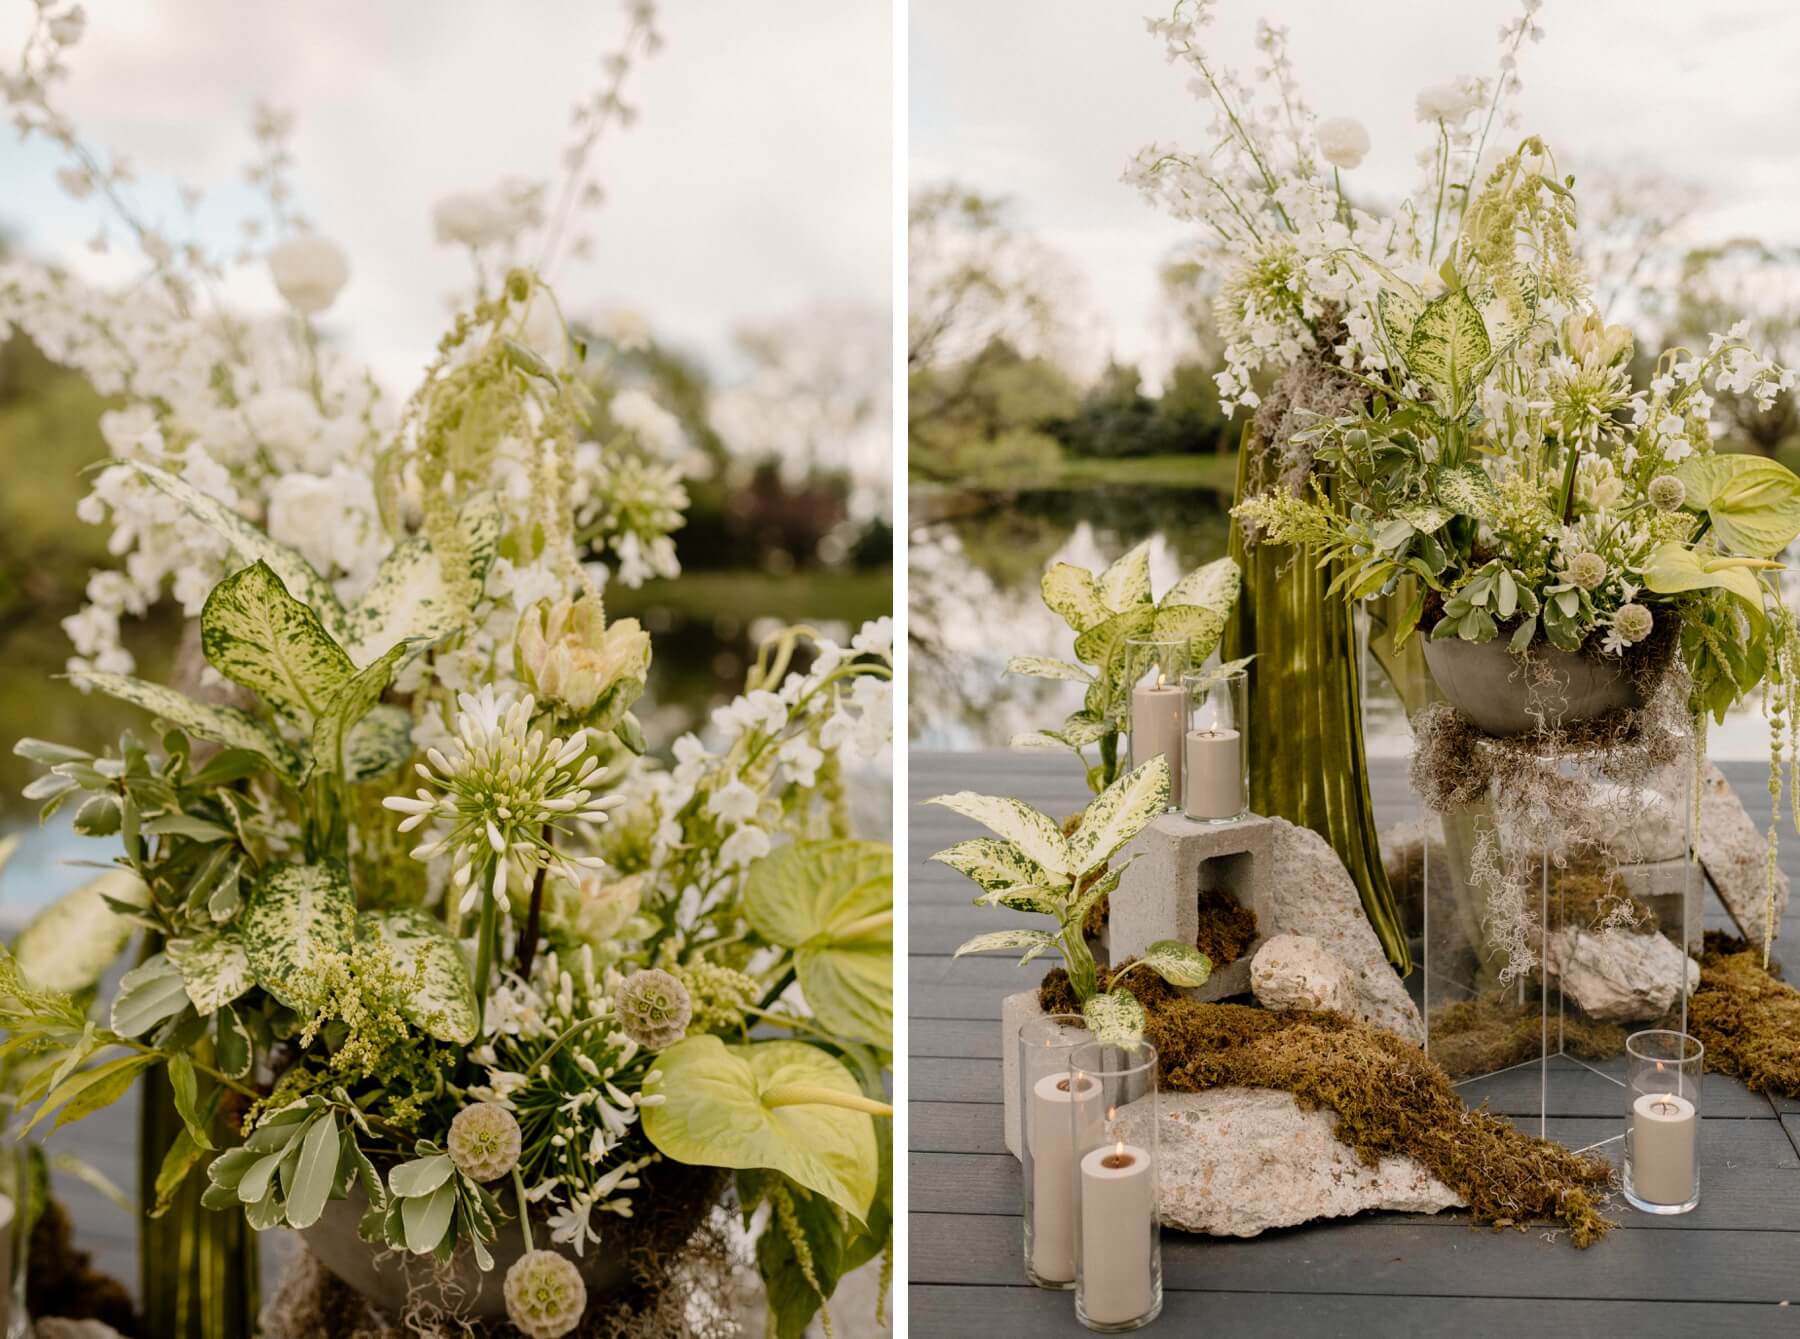 Green and white wedding inspiration: green and white flowers with stone colored candles